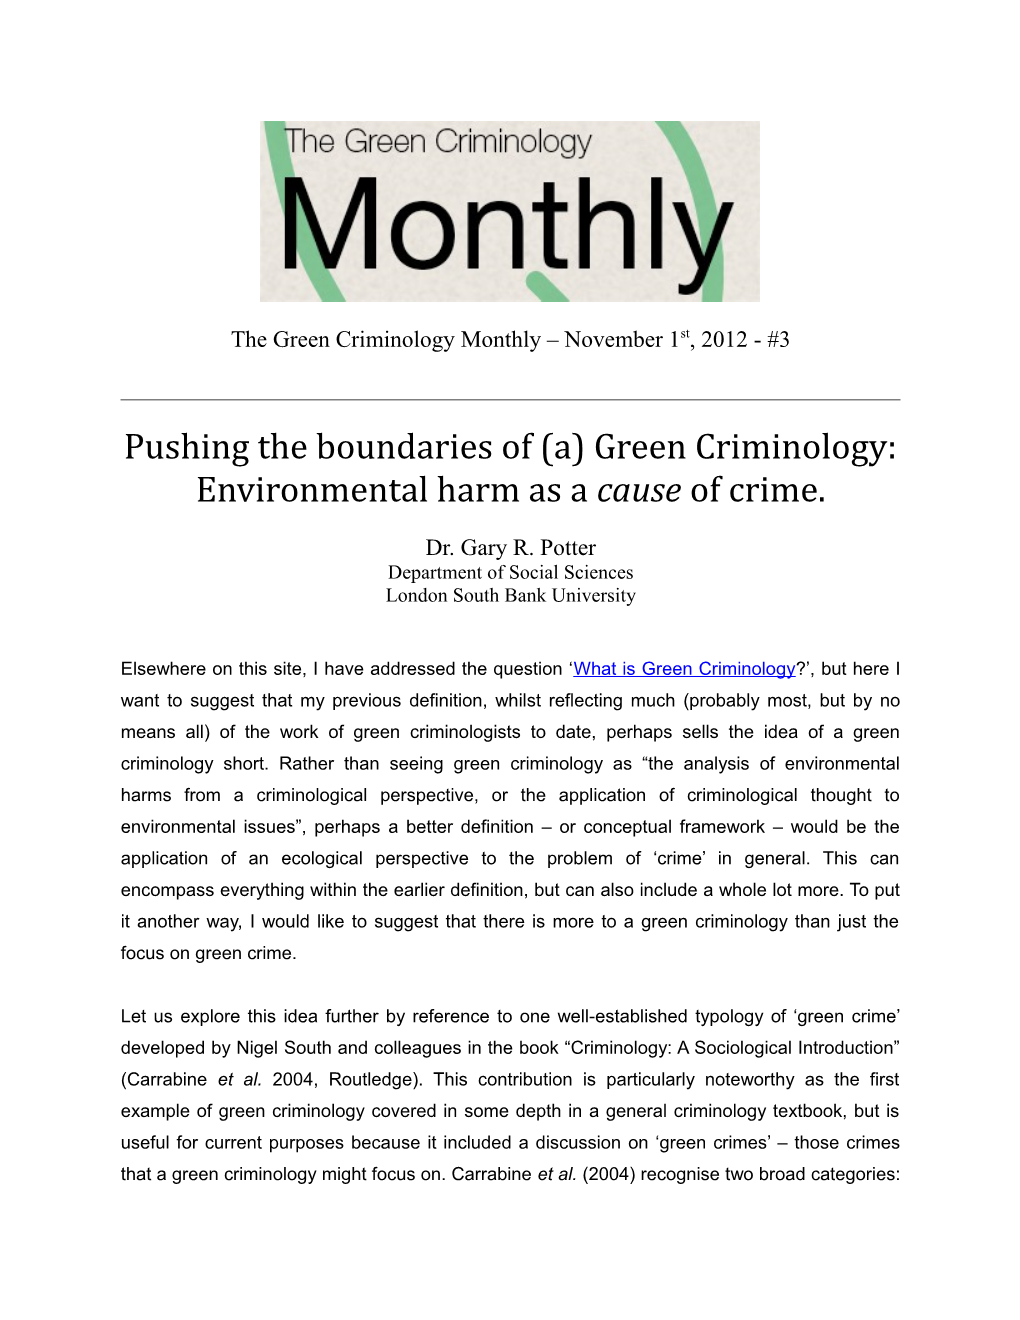 Pushing the Boundaries of (A) Green Criminology